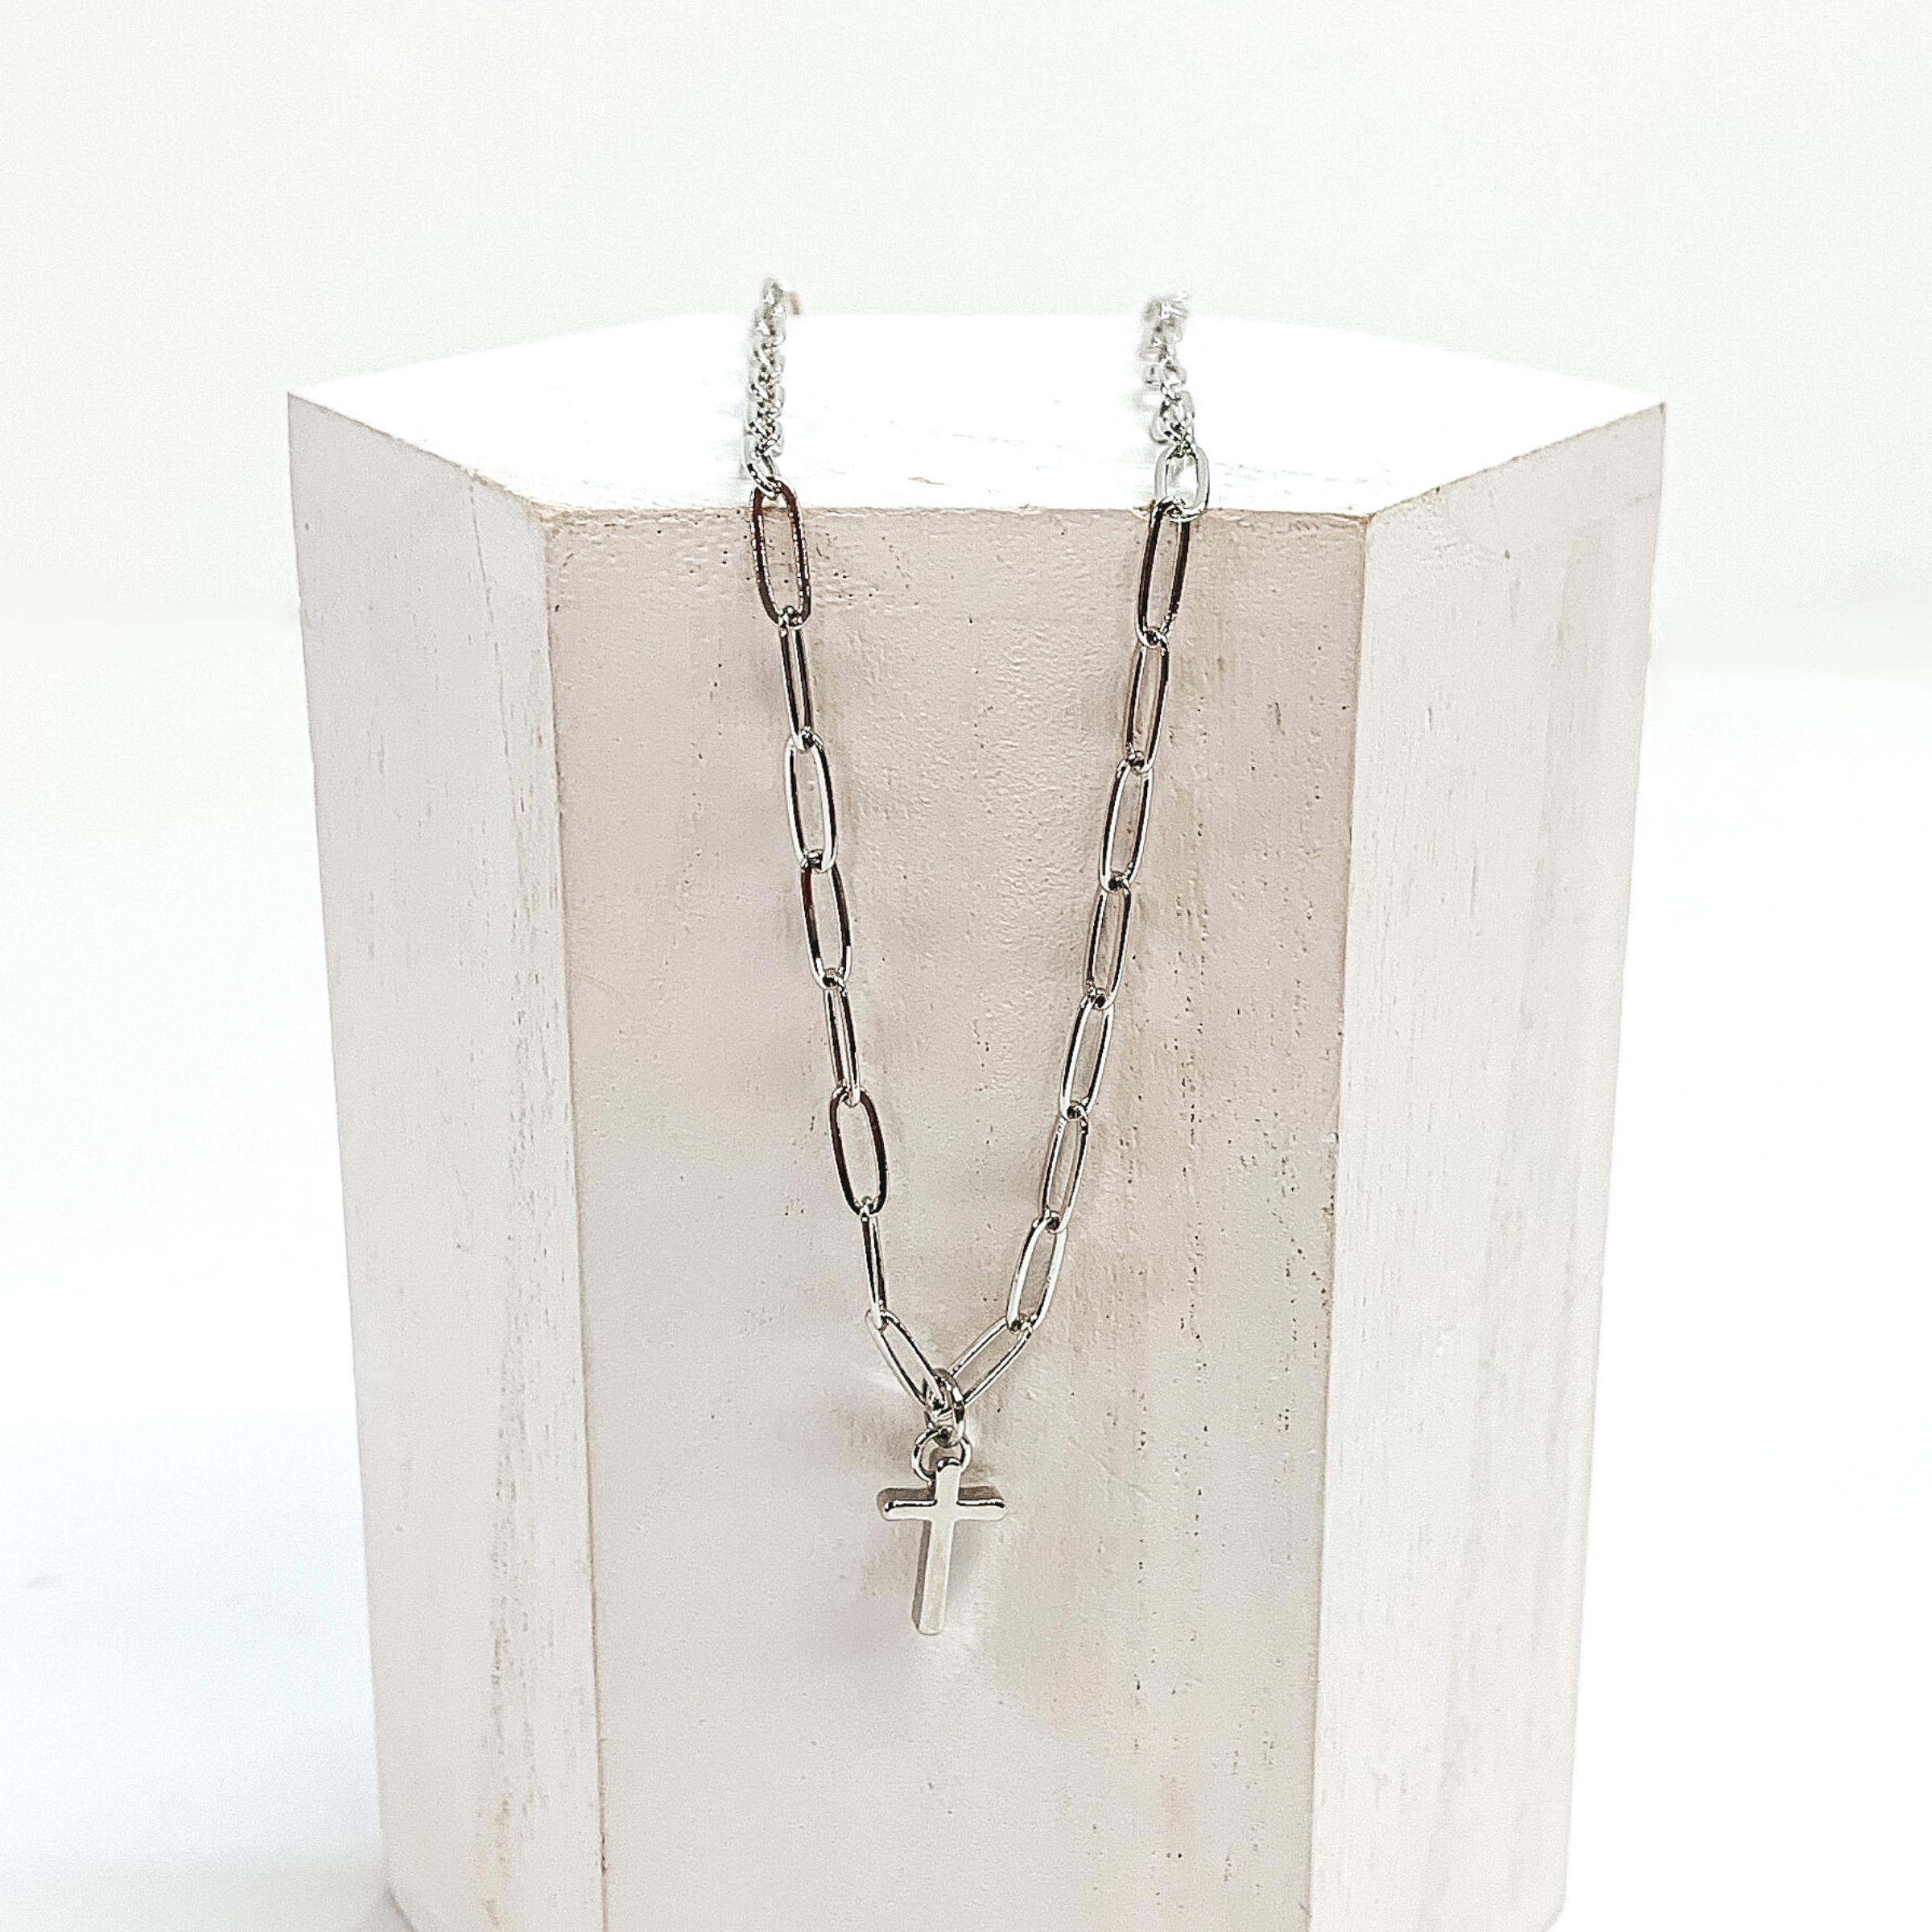 Silver paper clip chained necklace with a small, silver cross charm. This necklace is pictured laying on a white block on a white background.